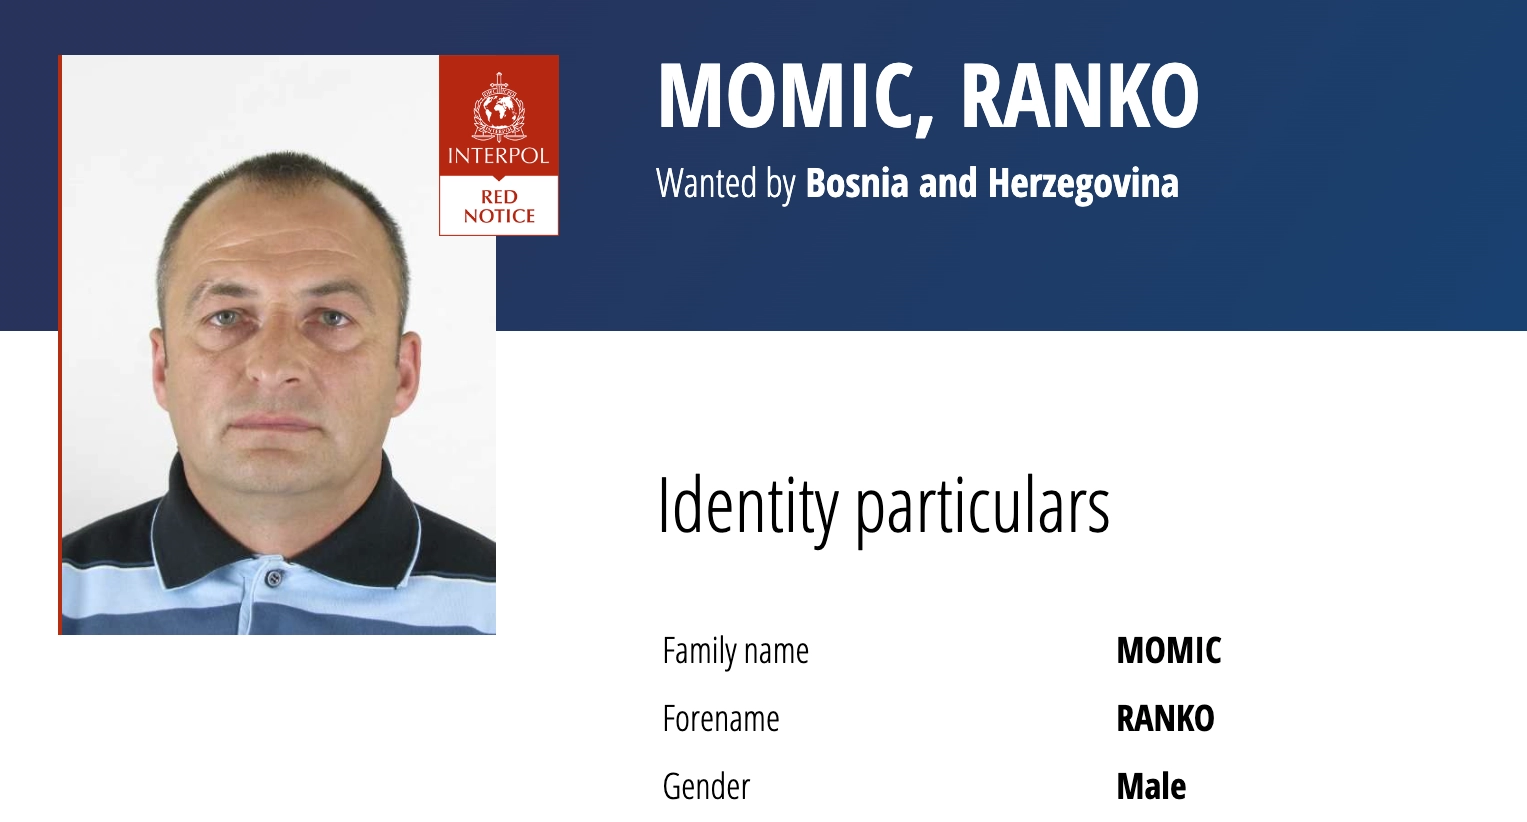 Ranko Momić on <a href='https://www.interpol.int/How-we-work/Notices/View-Red-Notices?fbclid=IwAR38AX6f9NM0gJHGnH3B0POA2vVU1nifEED0BnGIxrNRA0U7pFYmxuiecDI#2015-32272' target='_blank'>INTERPOL</a>’s website in 2022 on their Red Notice list.